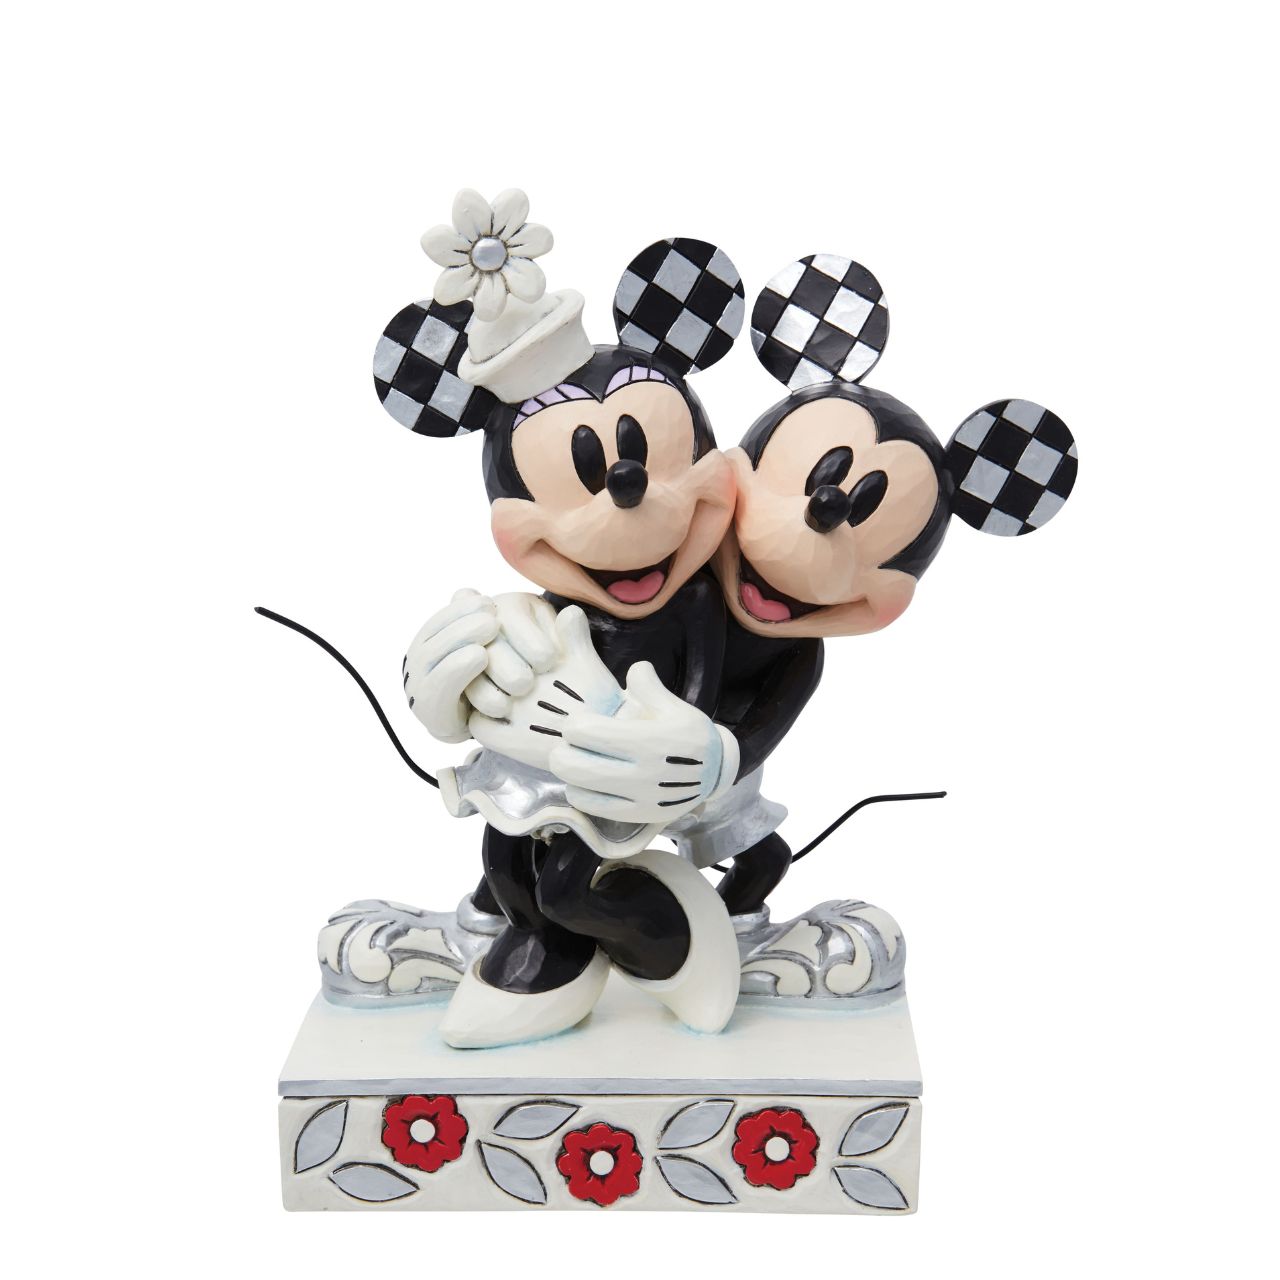 Jim Shore Mickey Mouse with Flowers Mini Figurine – Horgan's of